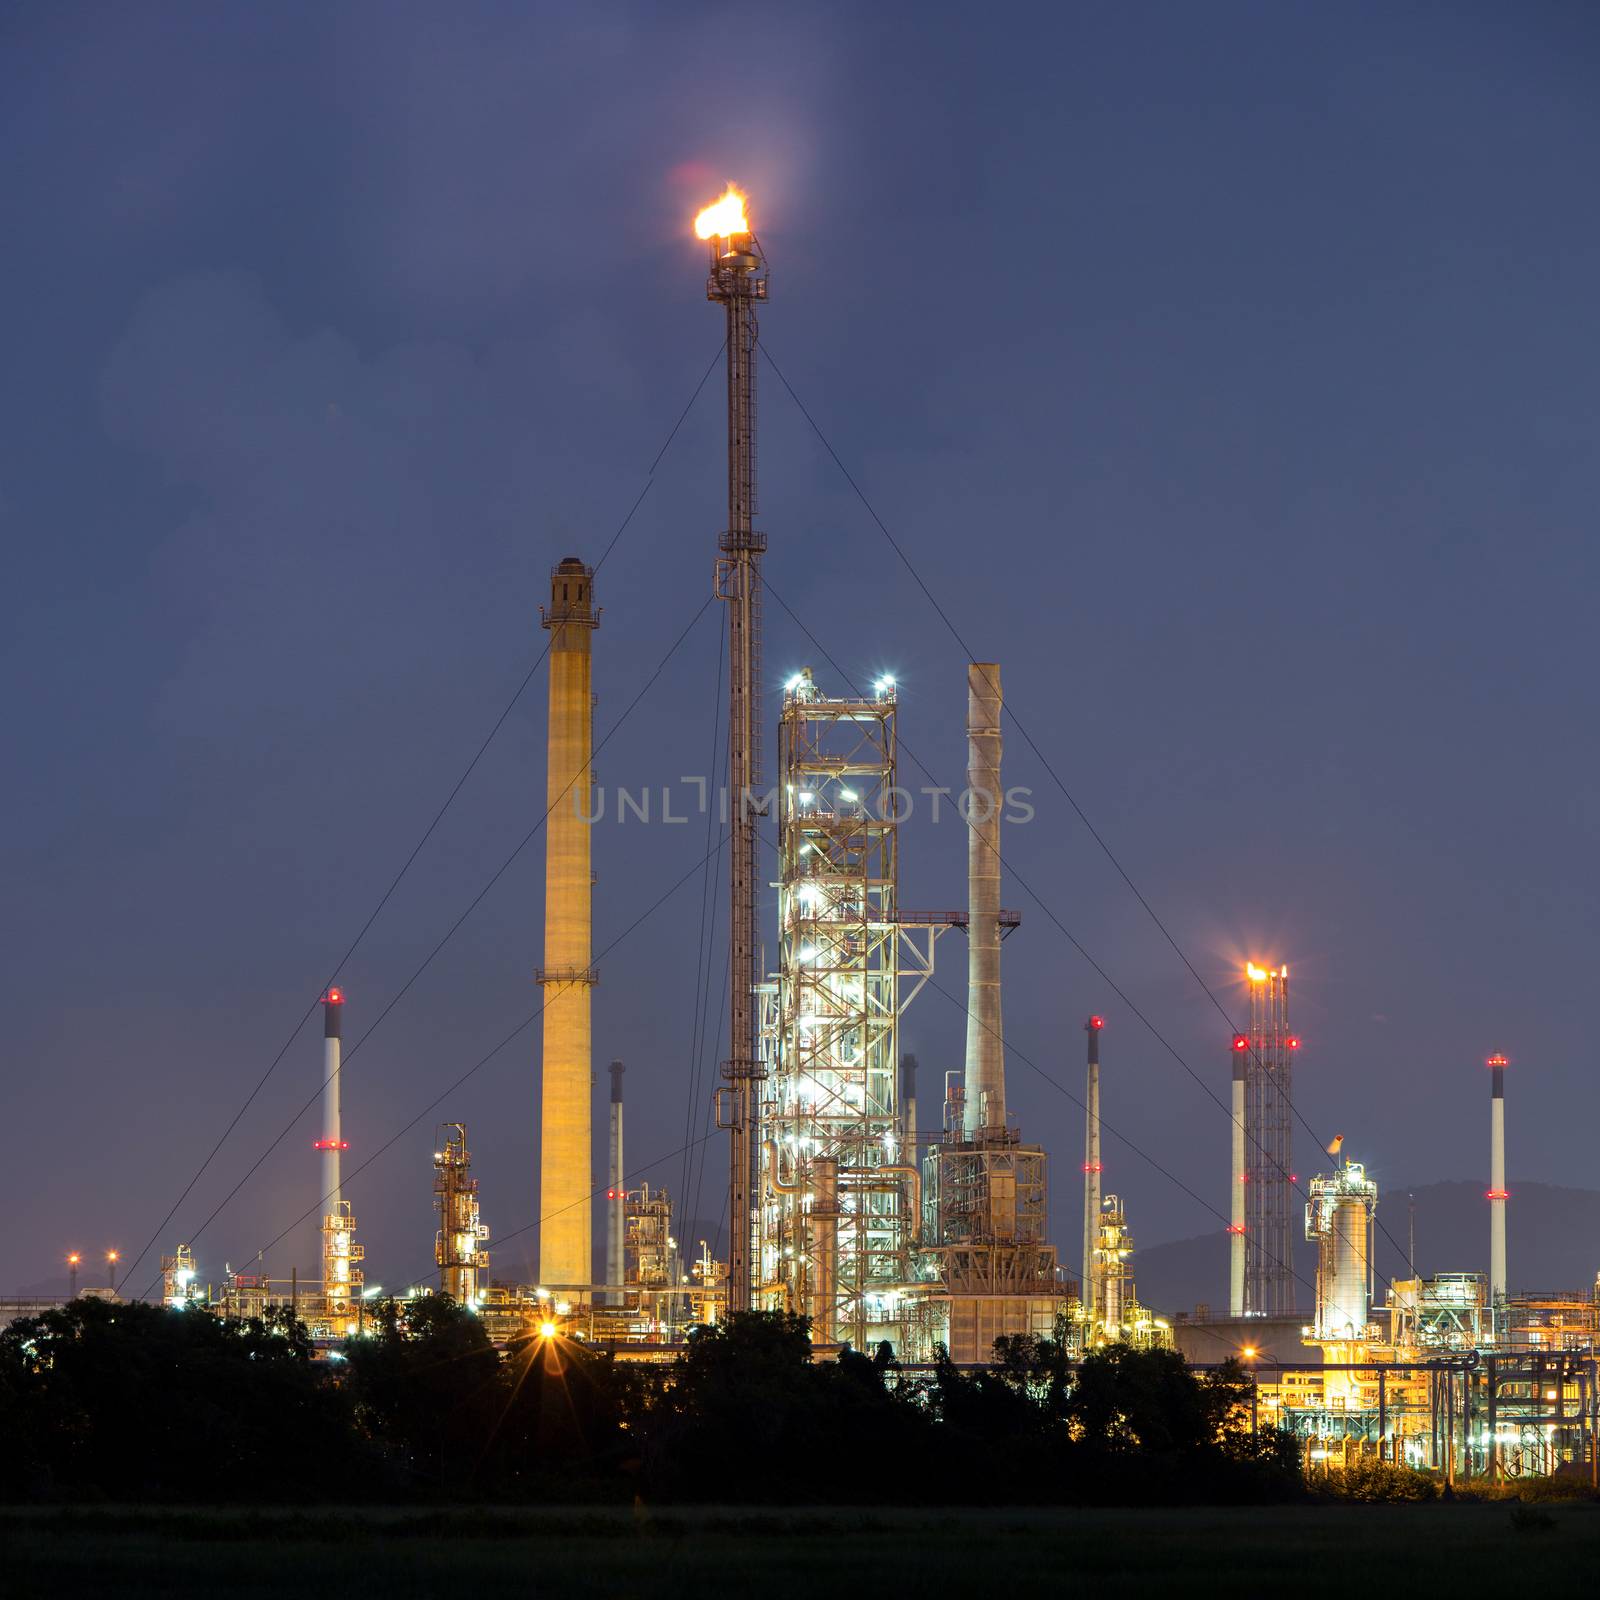 Panorama Oil Refinery Plant by vichie81